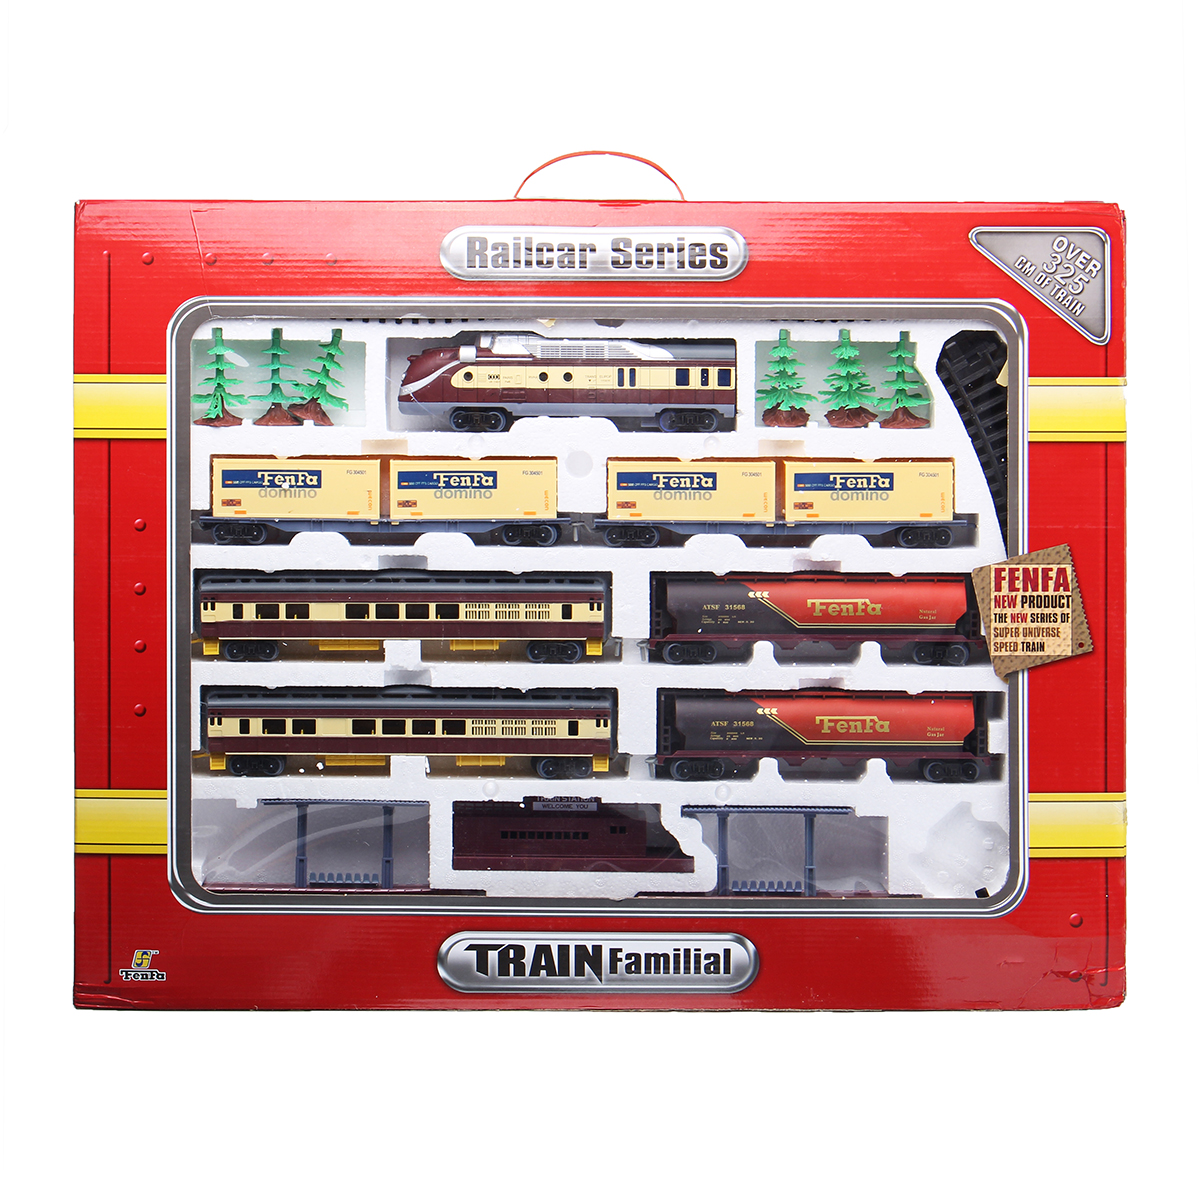 Electric Classic Train Rail Vehicle Toys Set Track Music Light Operated Carriages Educational Gift 91